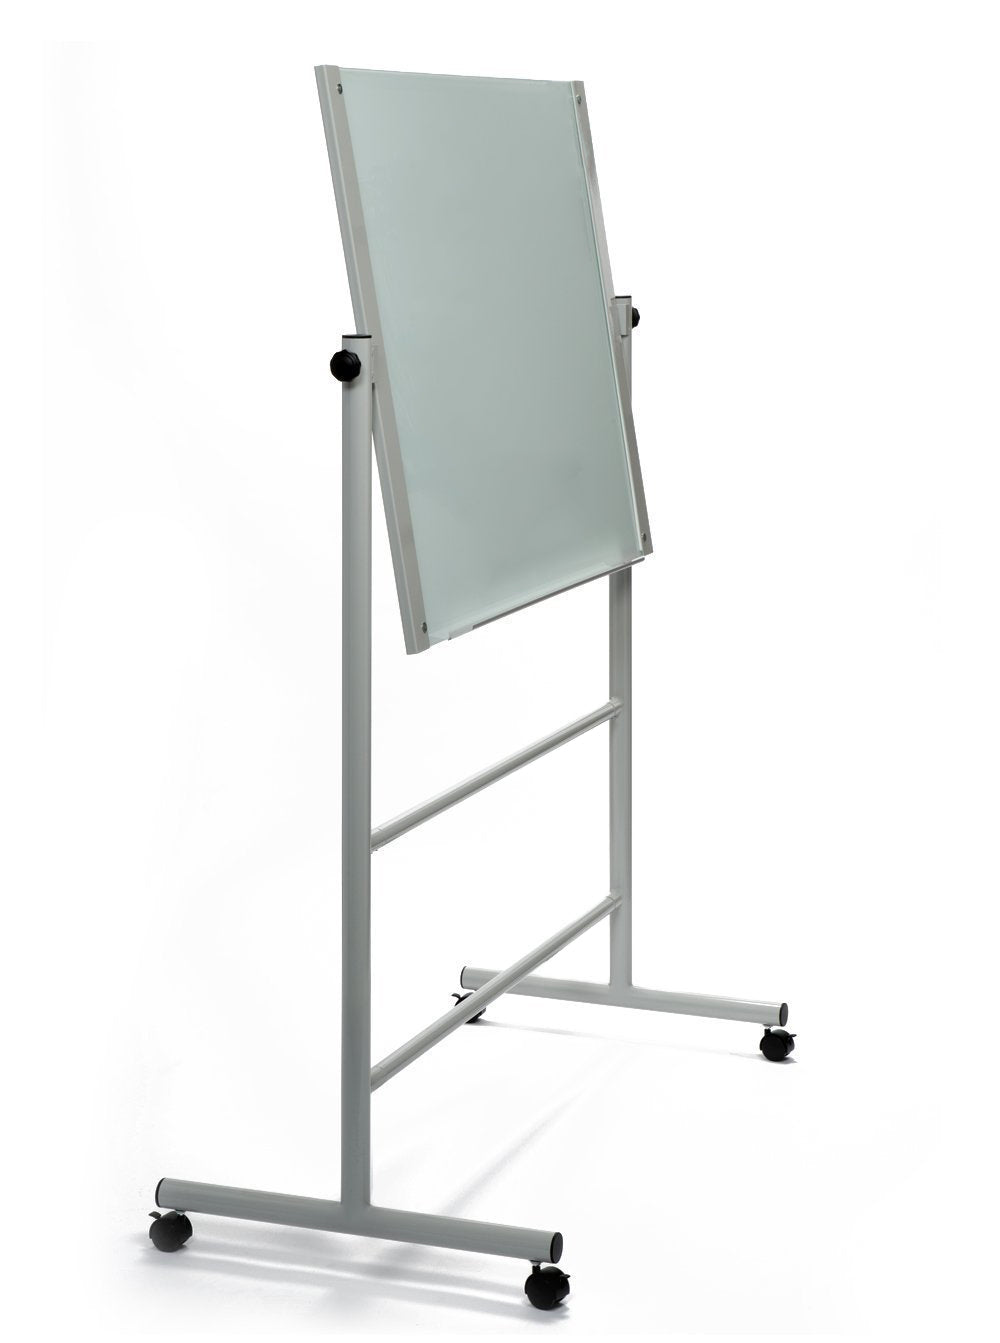 Dry Erase Board With Stand - Best Buy